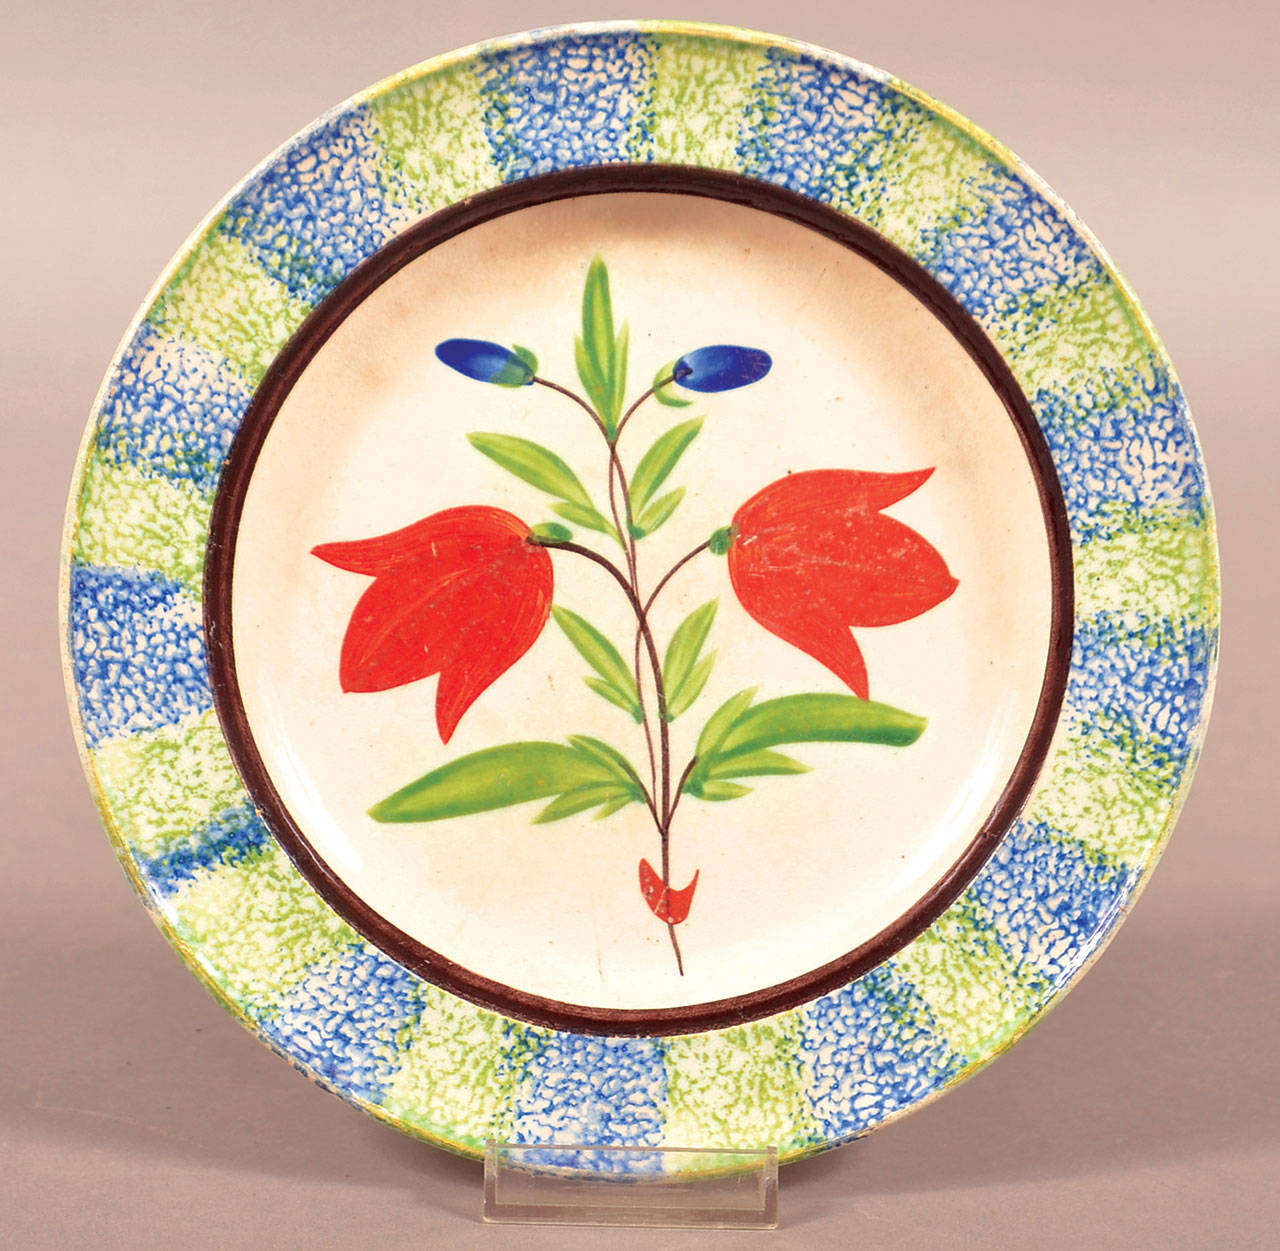 Dinnerware was made with overall spatter or sponged decoration or with a spatter or sponged border and center design. Both are popular vintage collectibles. Price is determined by the condition and the skill of the decorator. Center designs can be a single flower or a scene of rabbits playing baseball. This plate has stylized tulips with a spatter stripe border and sold for $224. (Cowles Syndicate Inc.)